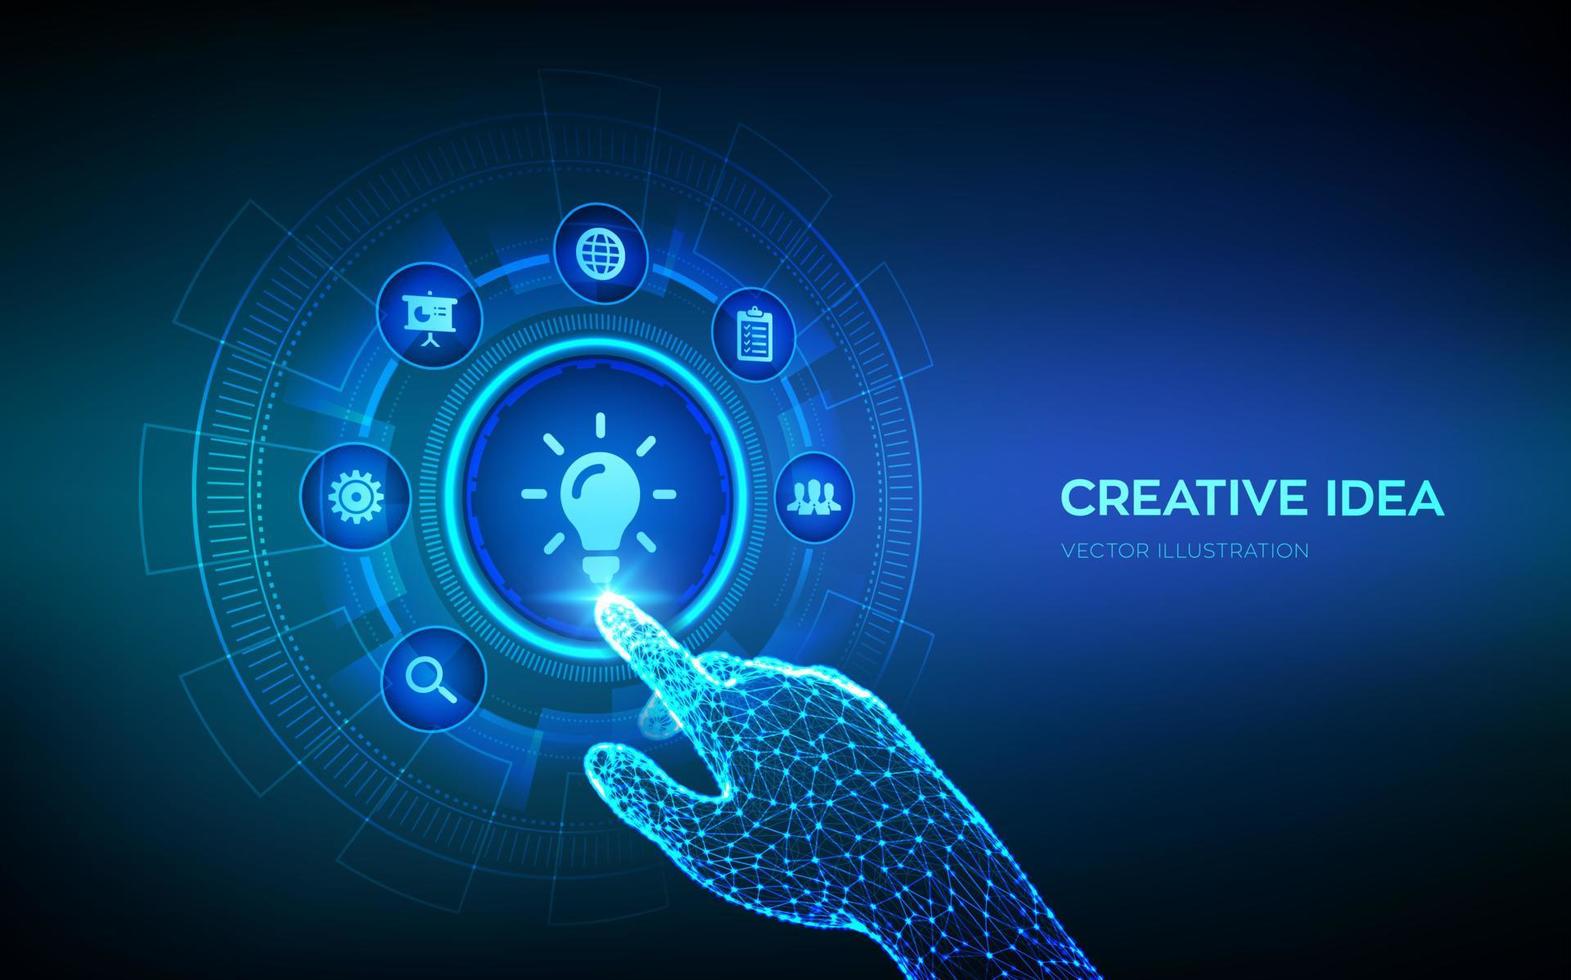 New idea. Creative Idea lamp icon. Creativity, innovation and inspiration modern technology and business concept on virtual screen. Robotic hand touching digital interface. Vector illustration.